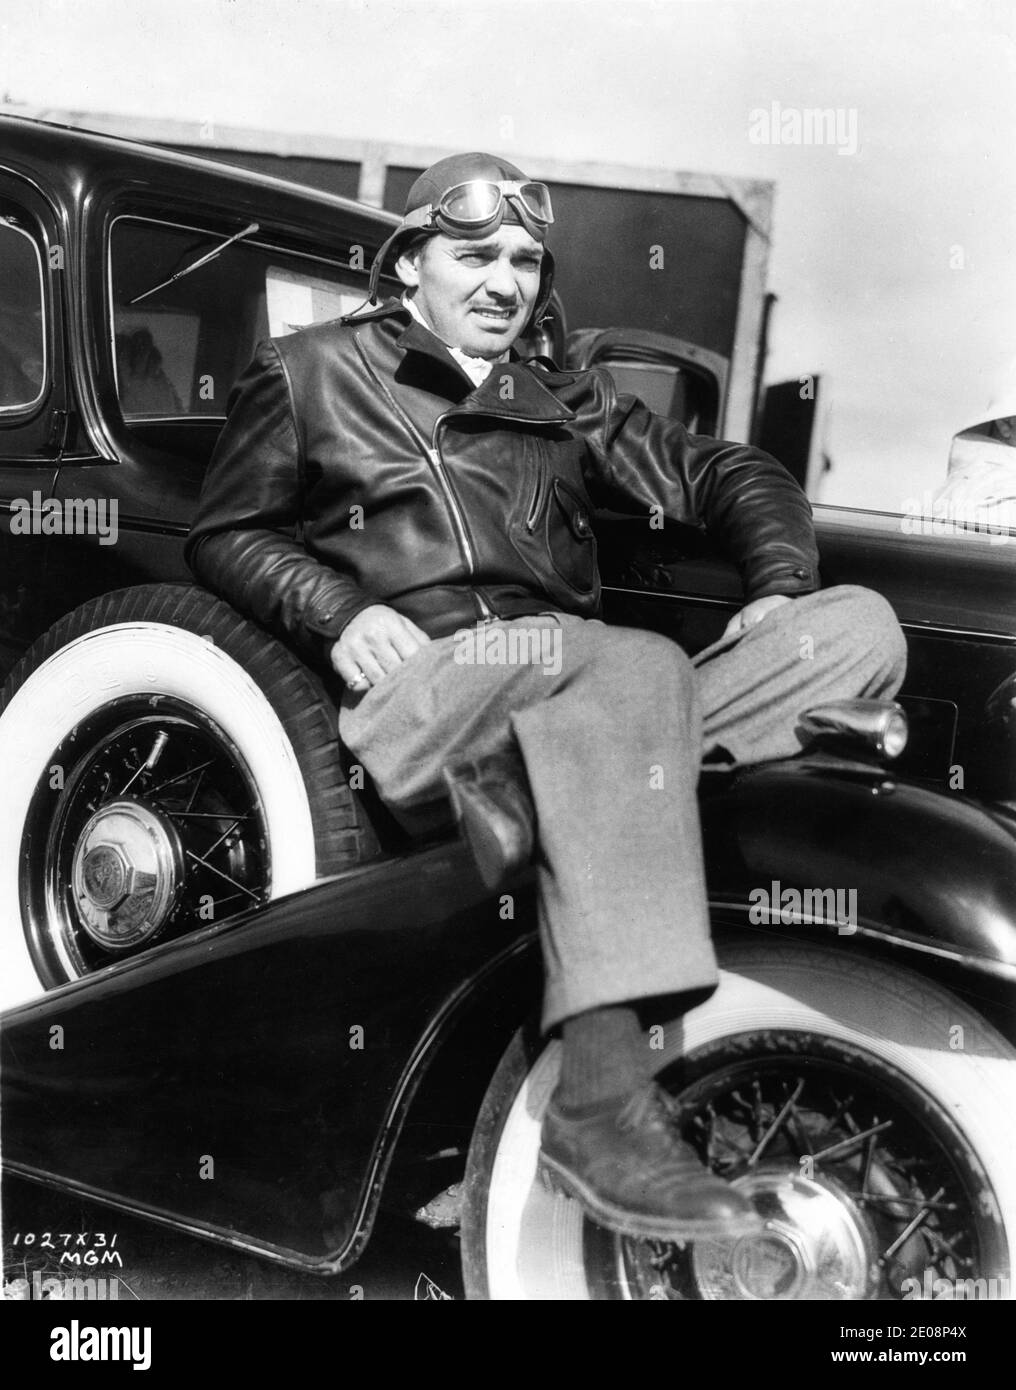 clark-gable-on-set-location-candid-sitting-on-car-during-break-in-filming-of-test-pilot-1938-d...jpg